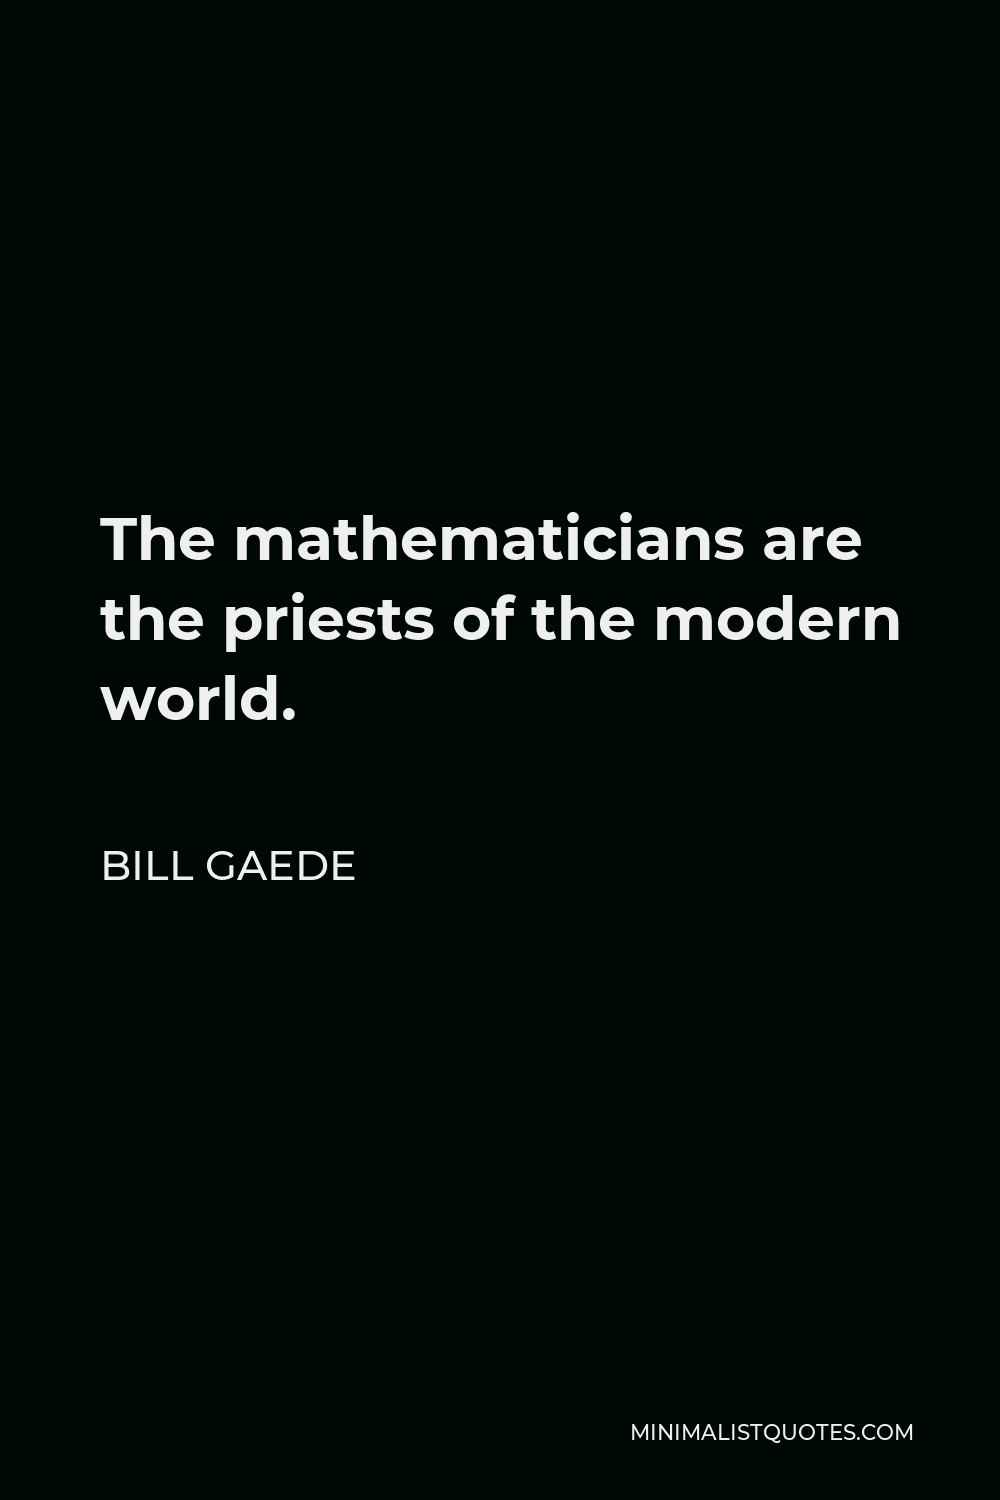 Bill Gaede Quote - The mathematicians are the priests of the modern world.